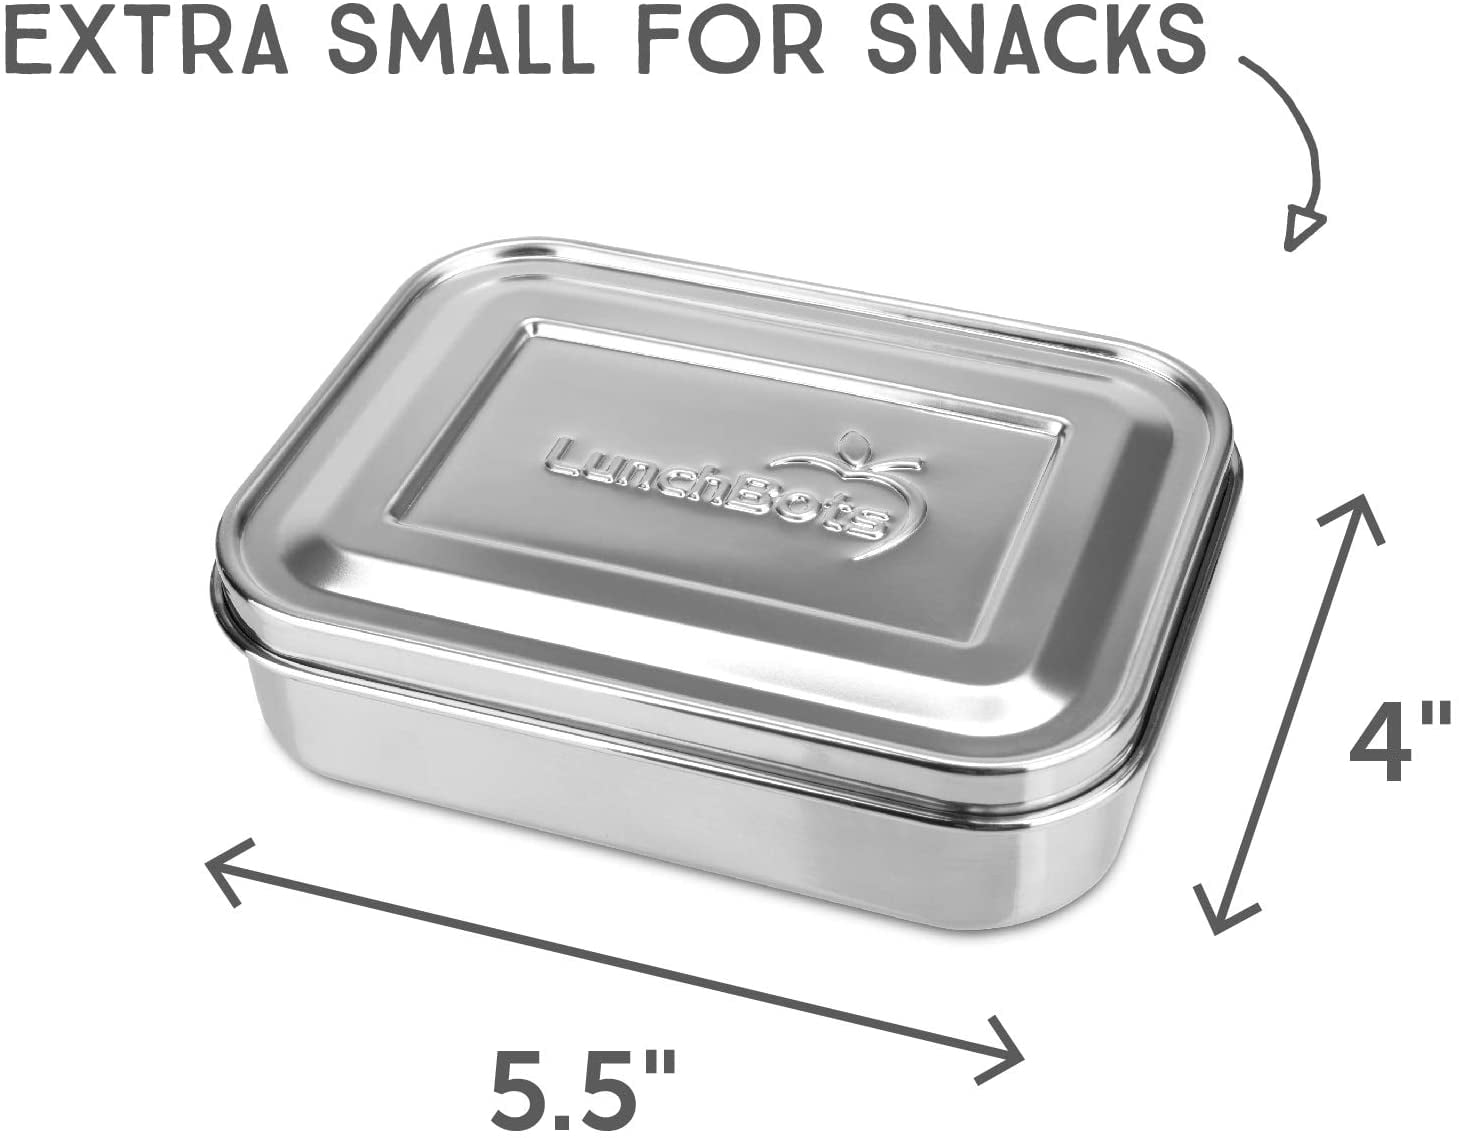 LunchBots Quad Stainless Steel 4 Compartment Bento Box Stainless